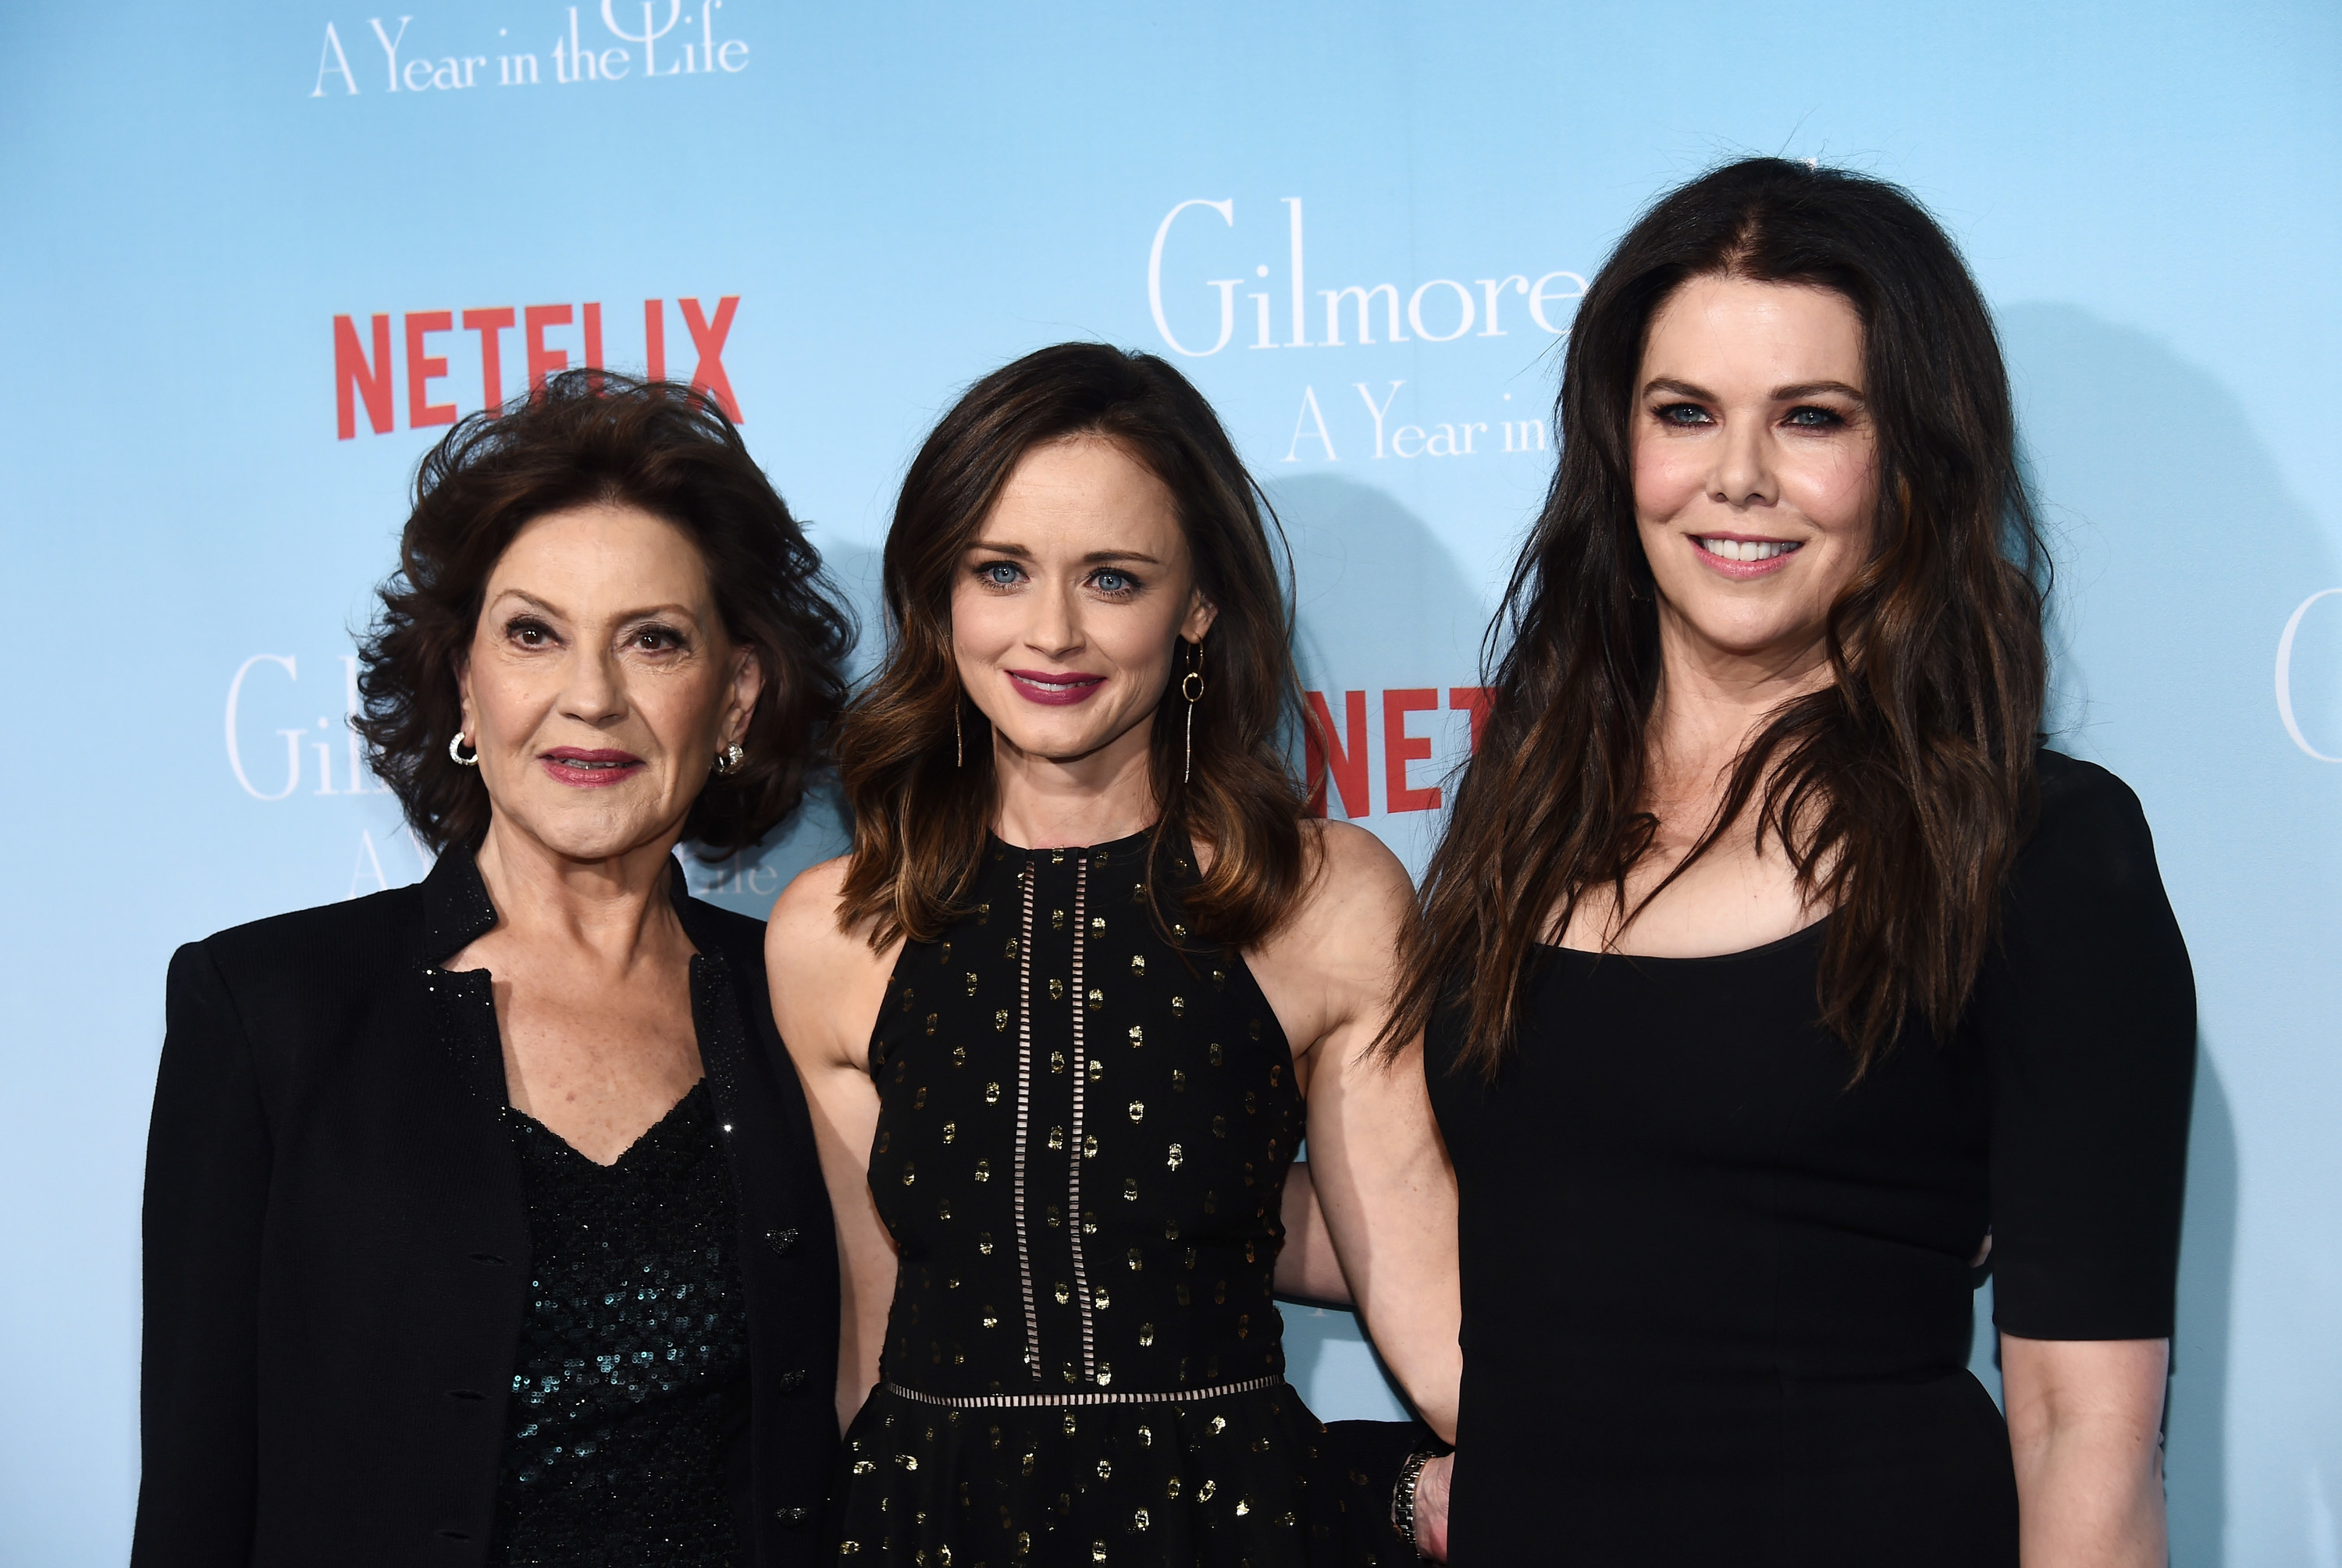 Members of the cast of Gilmore Girls at a press event